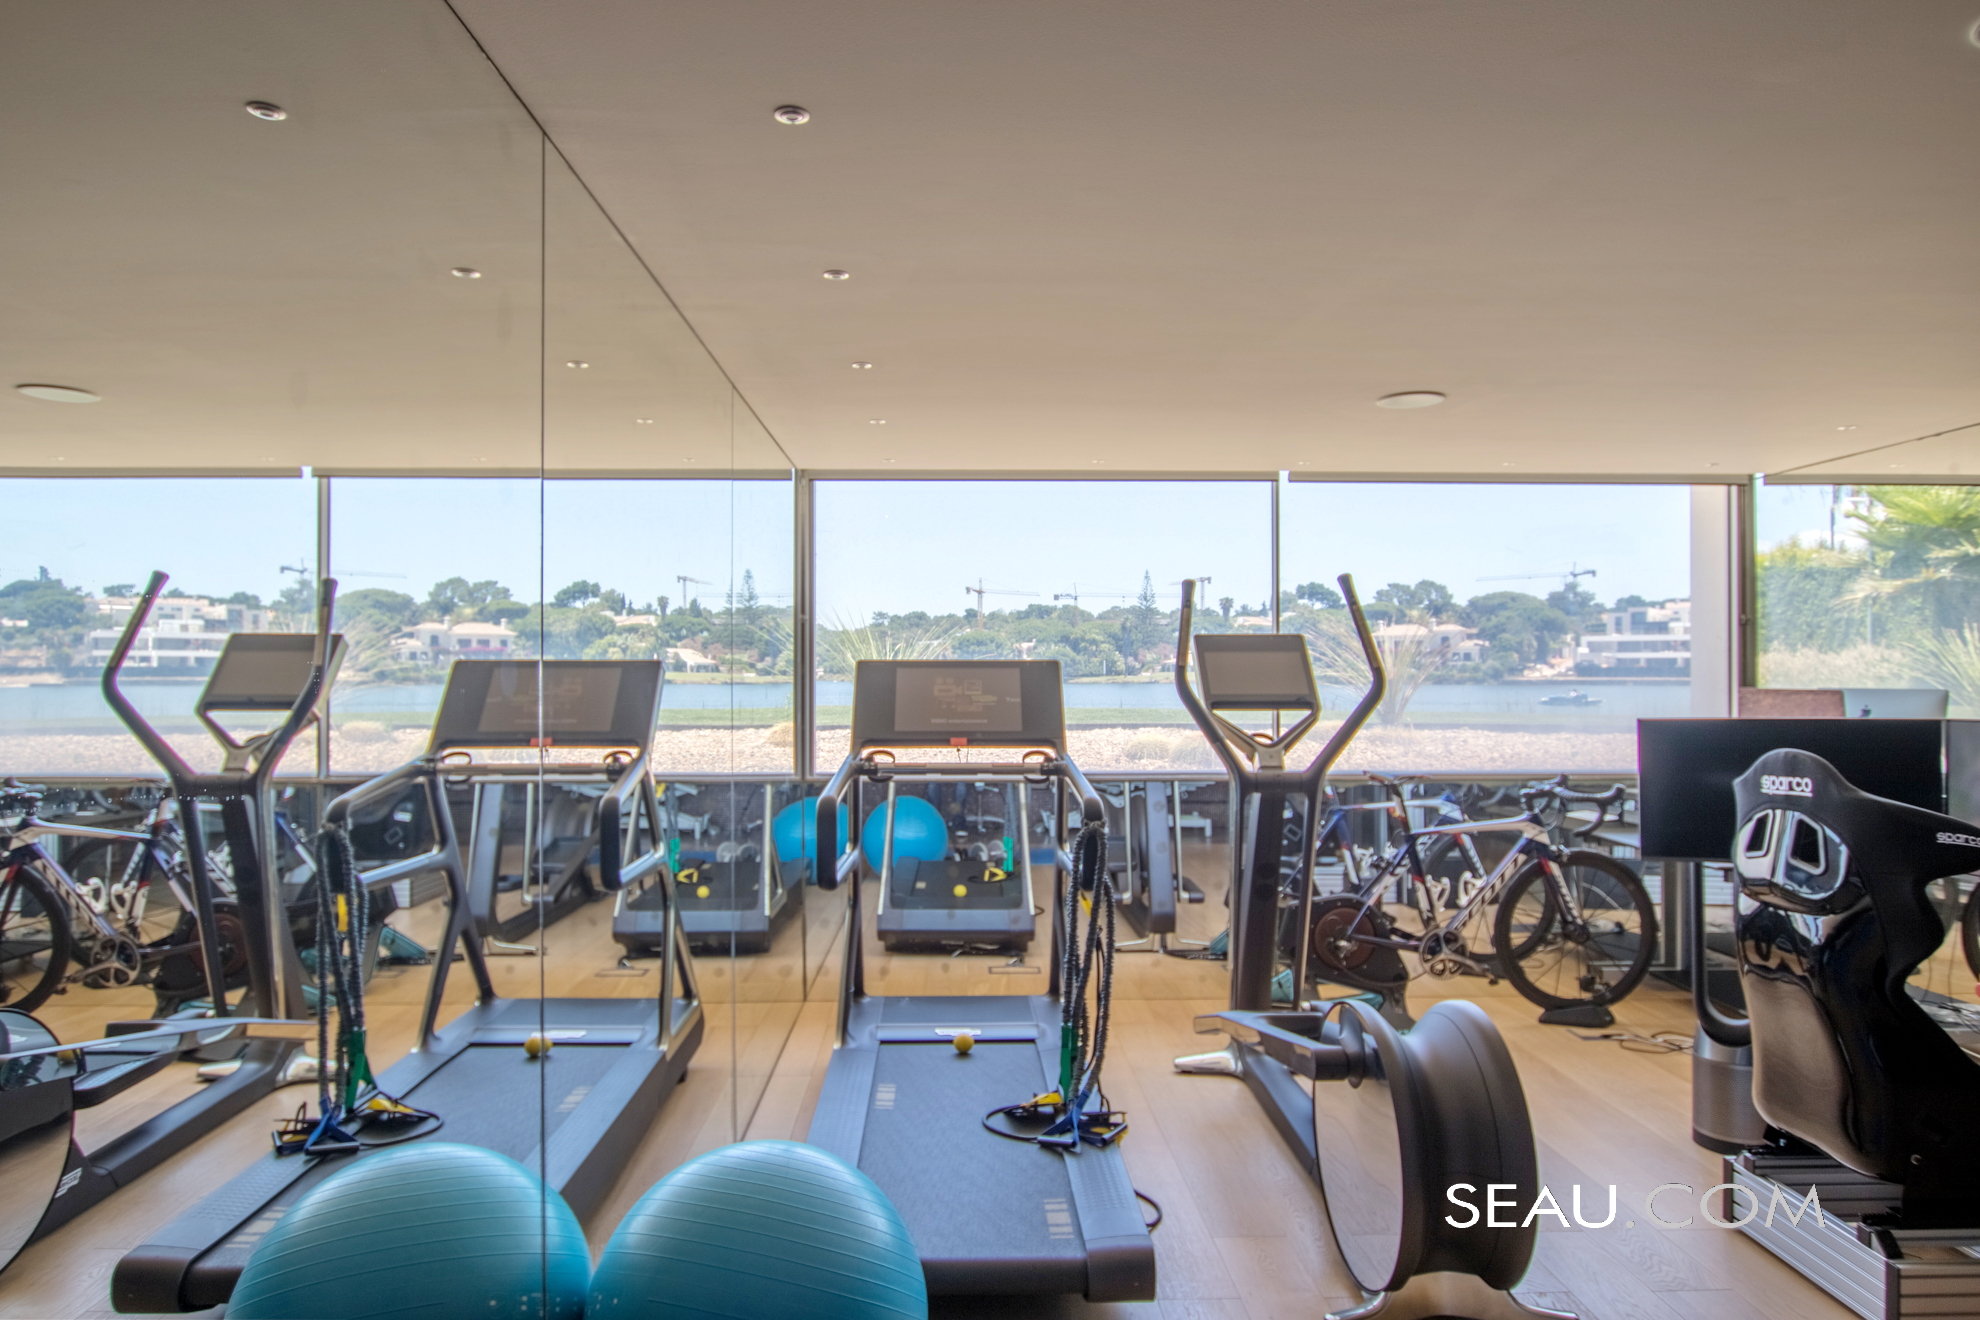 Super equipped gym overlooking the garden and lake